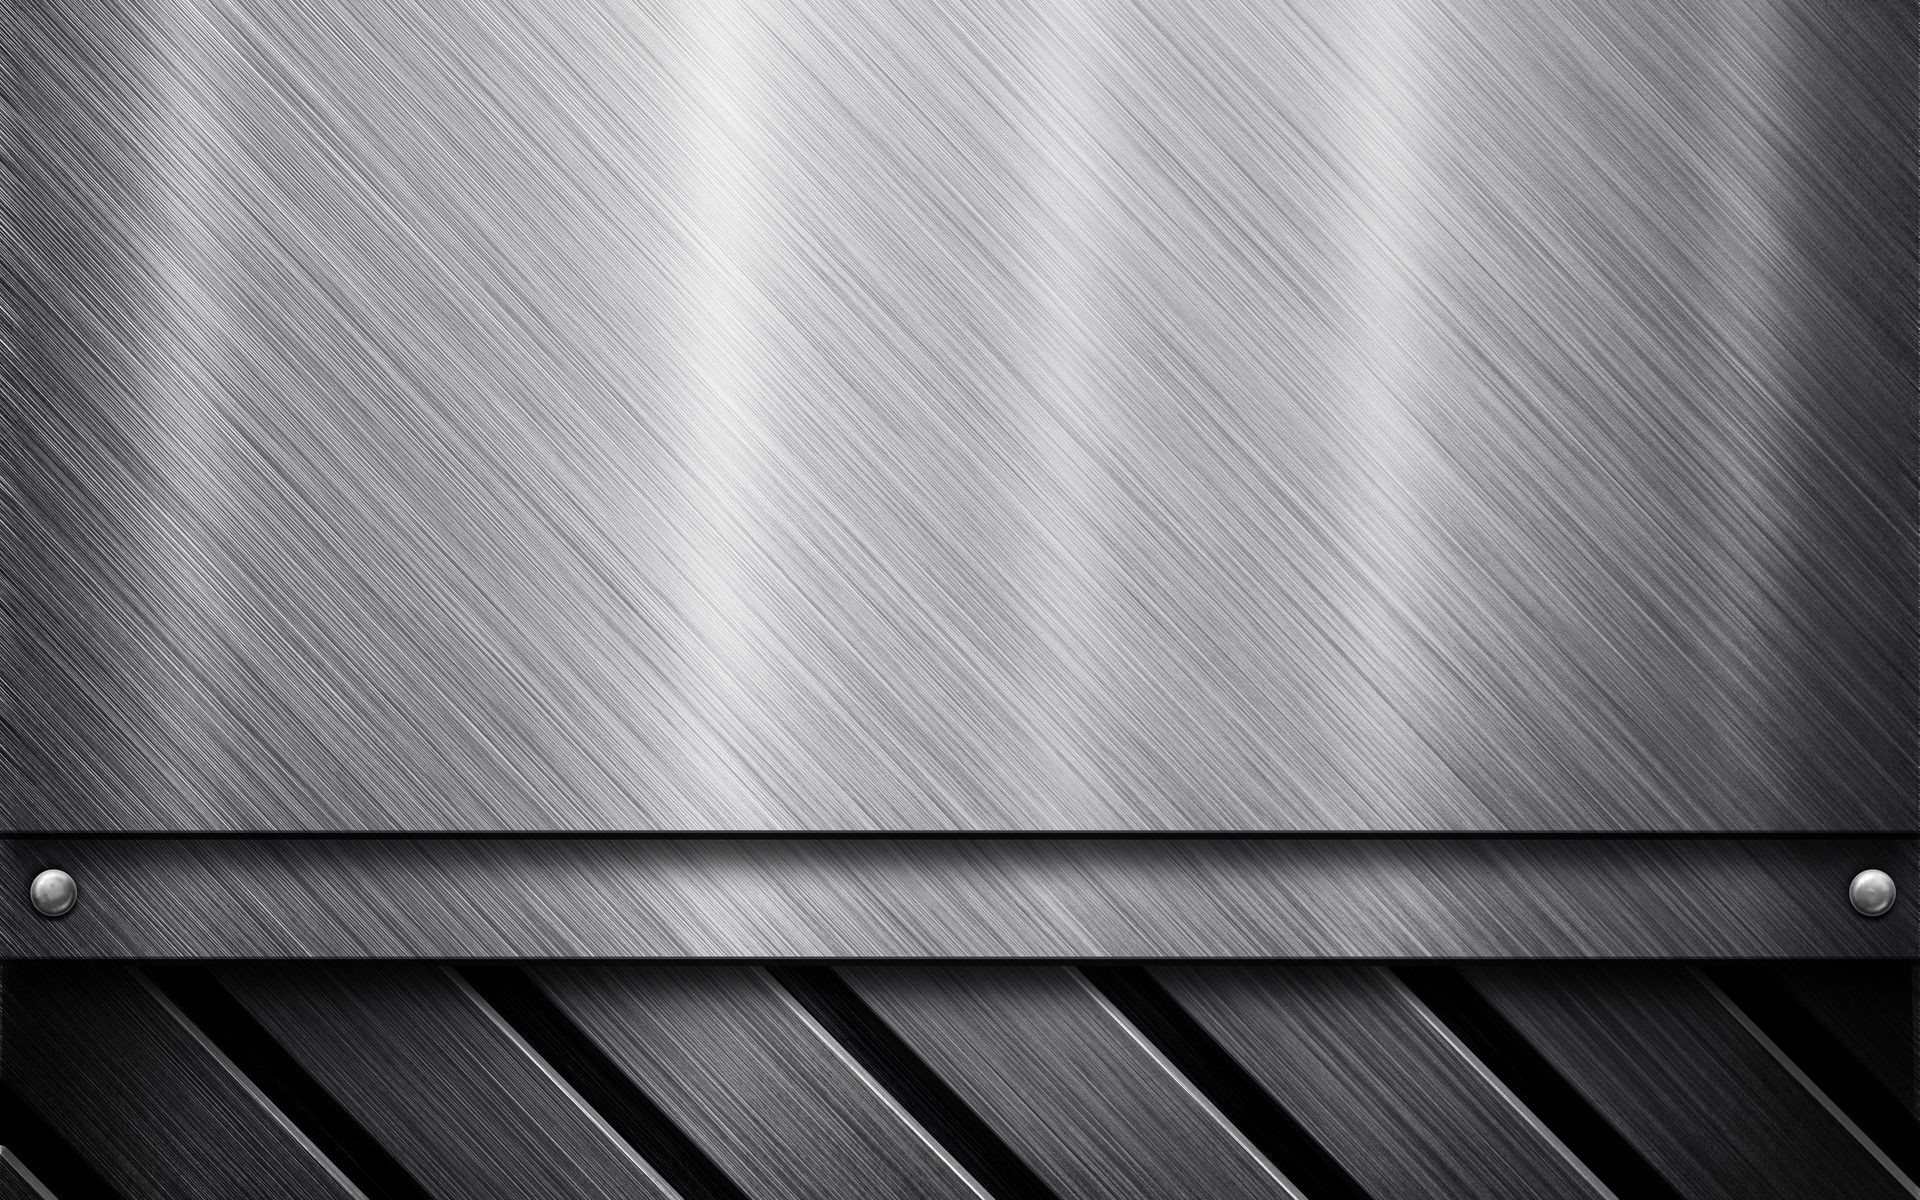 Grunge Background of Stainless Steel Metal Texture Closeup Stock Image   Image of grunge background 113018207